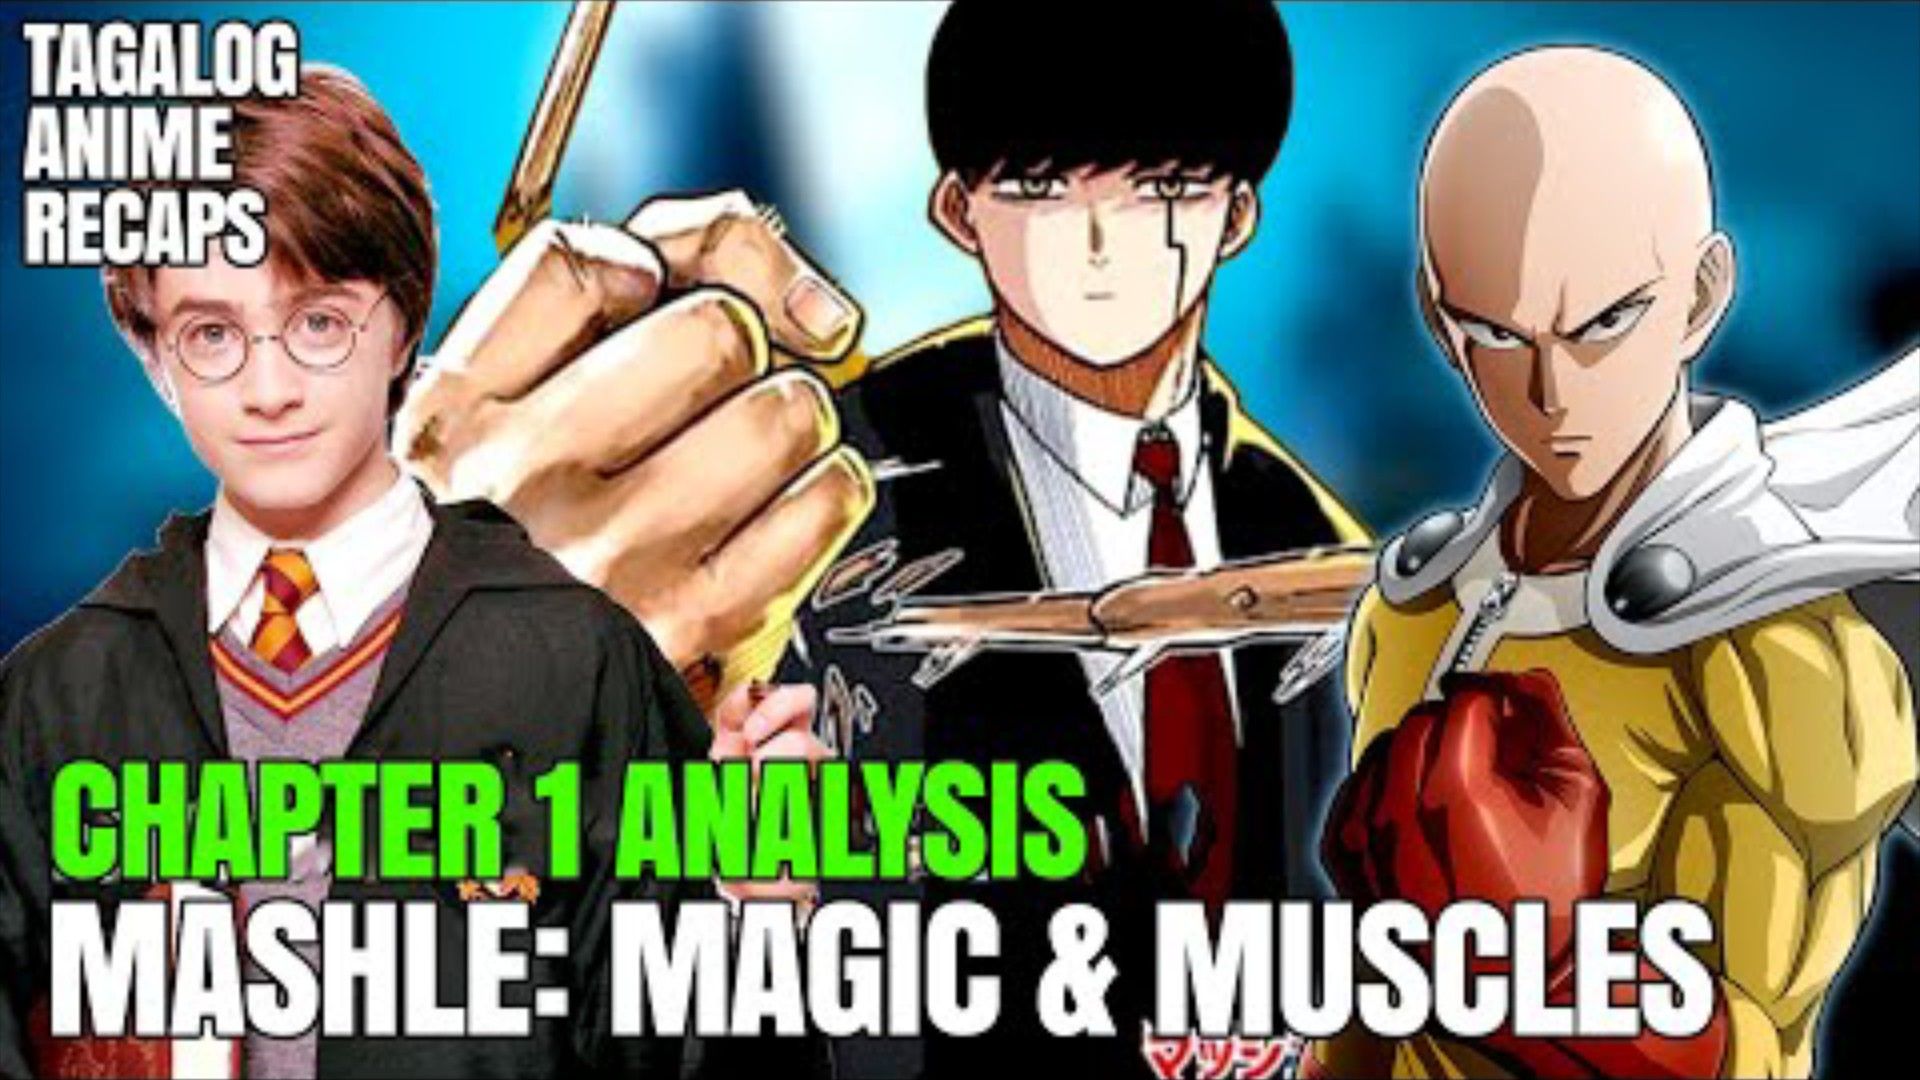 Mashle: Magic and Muscles is Harry Potter meets One Punch Man and